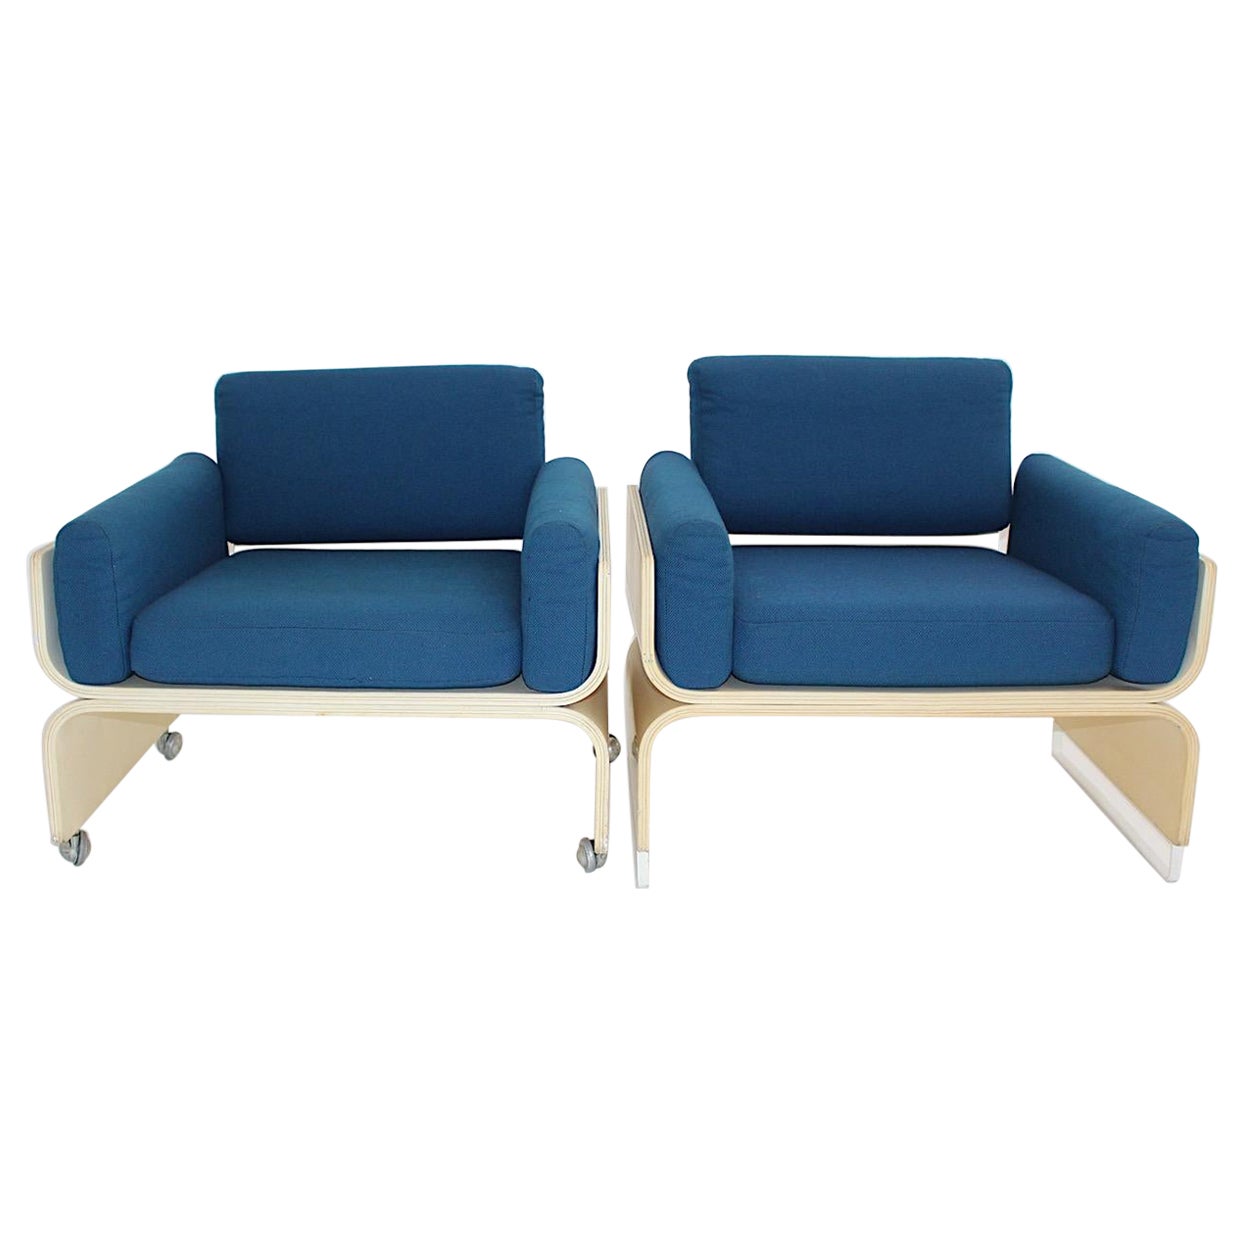 Space Age Vintage White Blue Lounge Chairs, 1960s For Sale